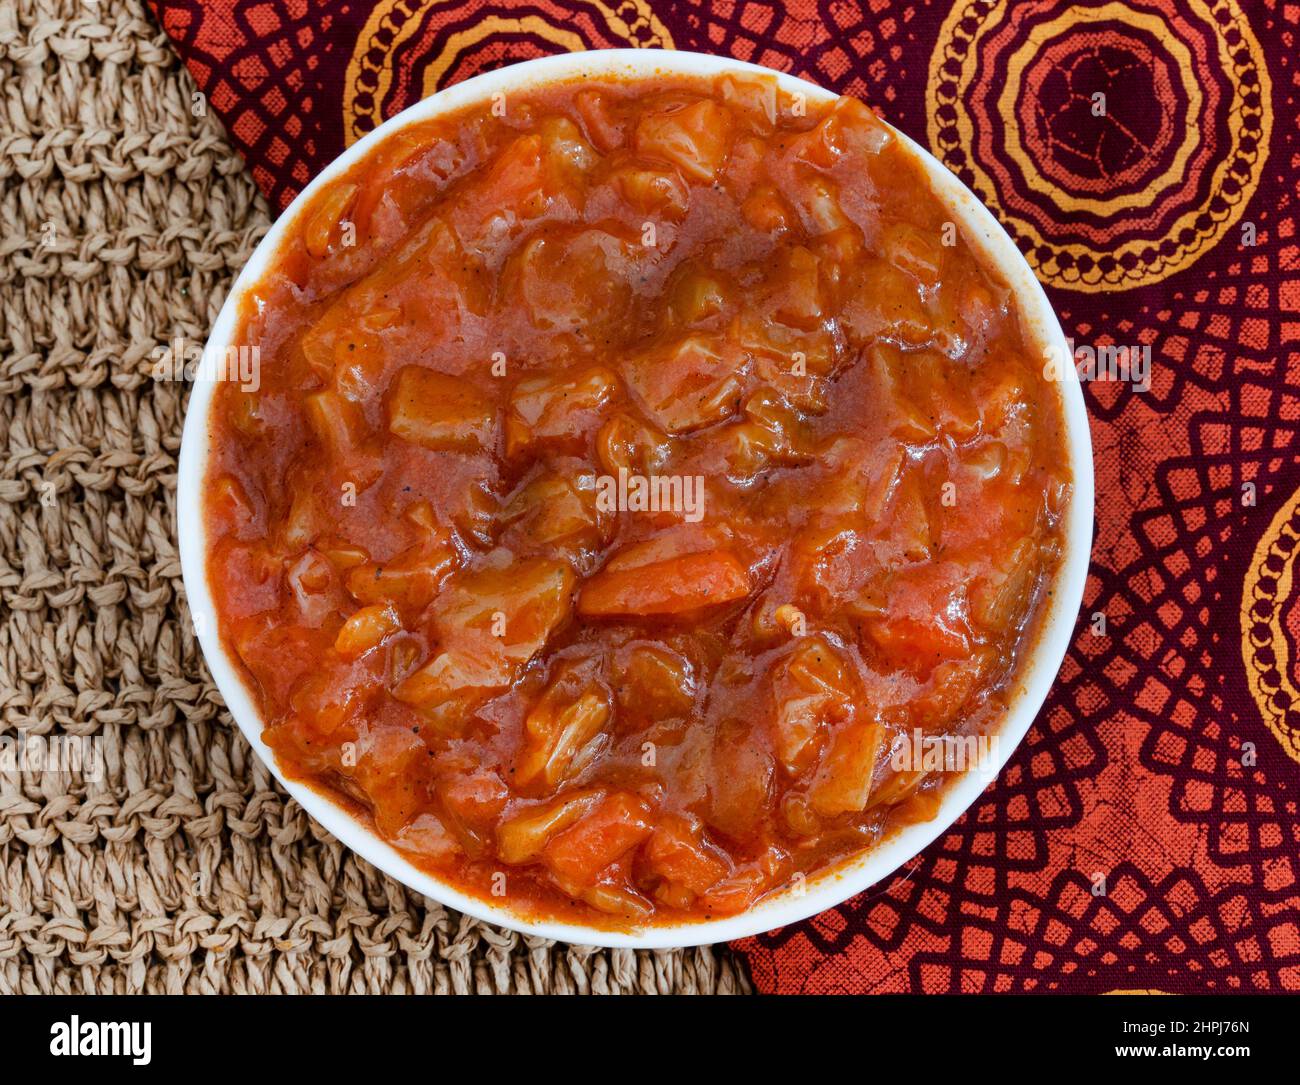 South African vegetable relish or side dish called Chakalaka, originating from townships Stock Photo